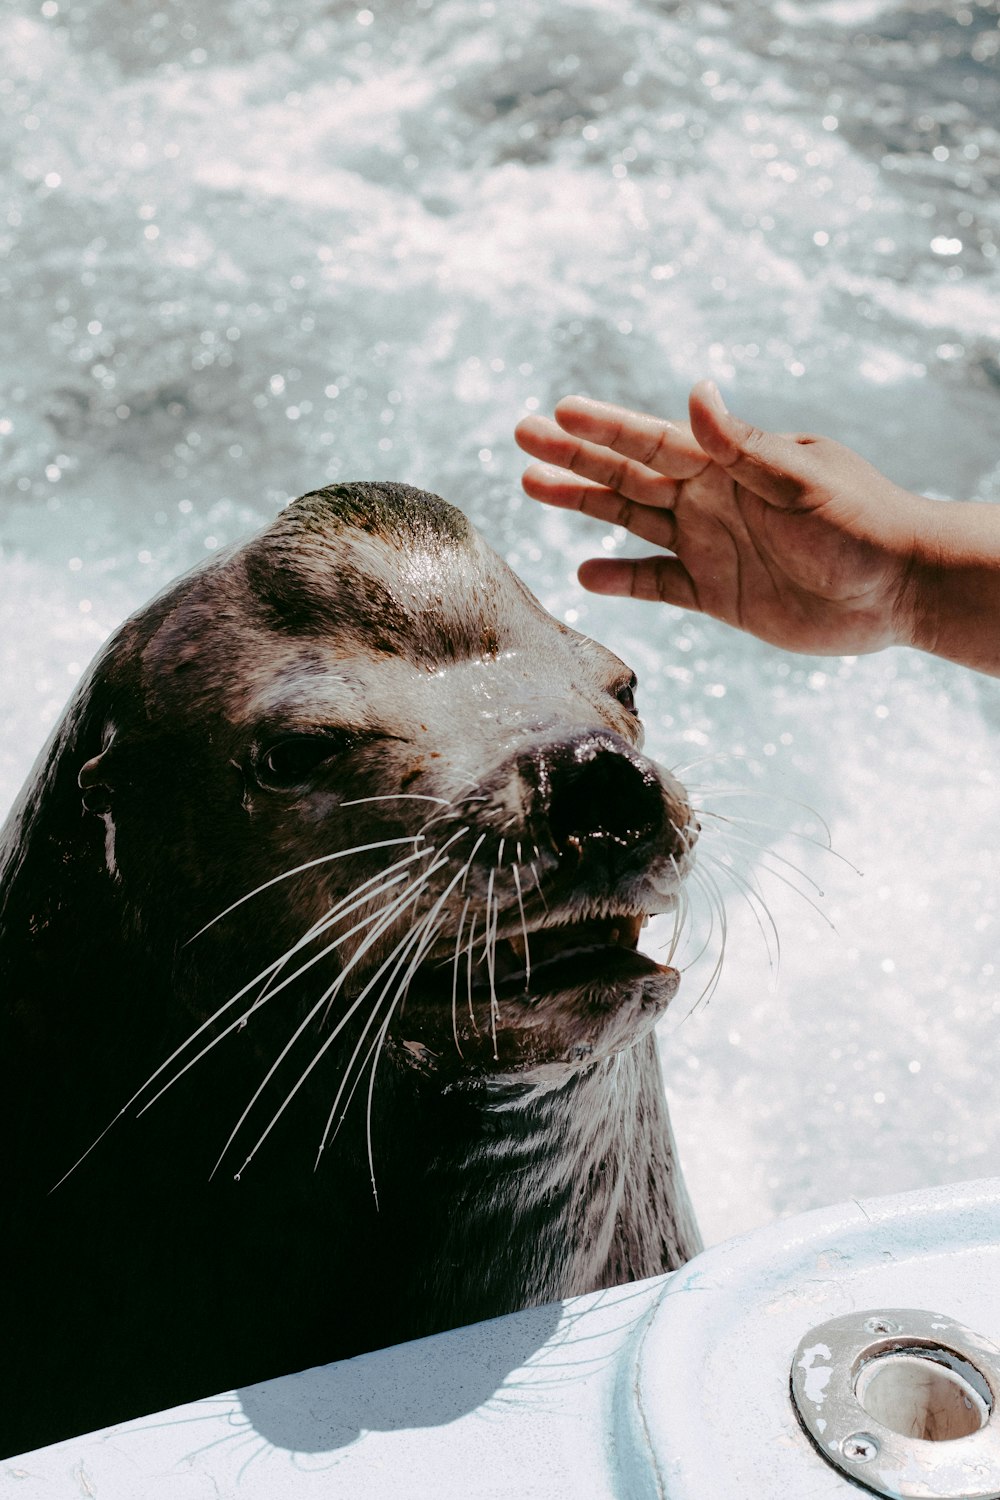 a sea lion being petted by a person in a boat